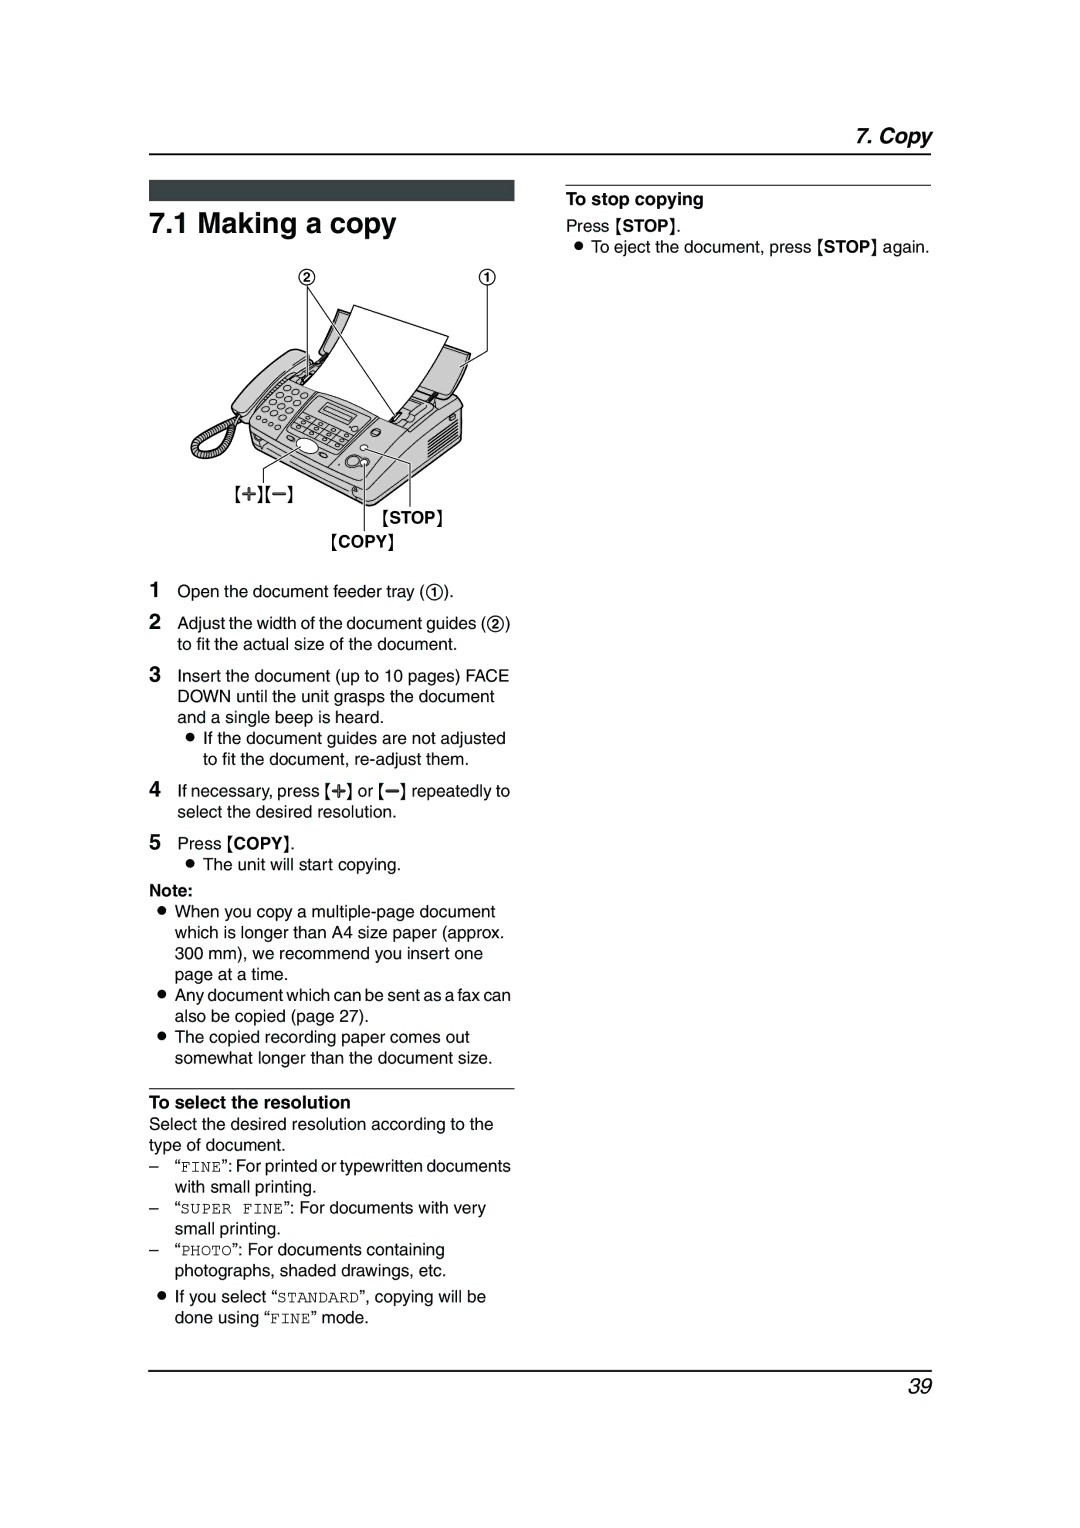 Panasonic KX-FT901BX manual To stop copying, To select the resolution 